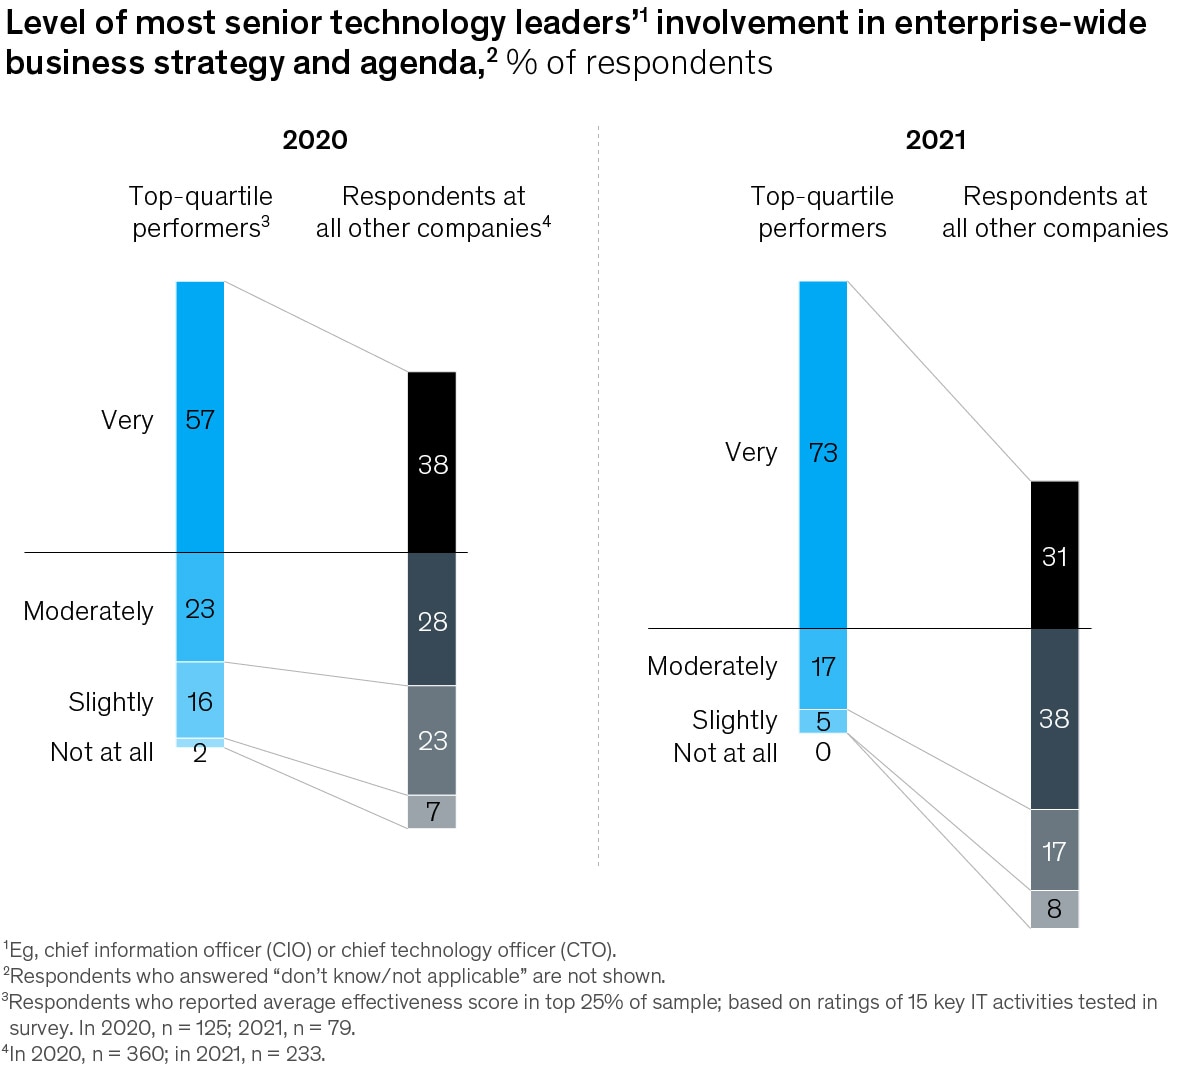 Chart of technology leaders' involvement in business strategy and agenda